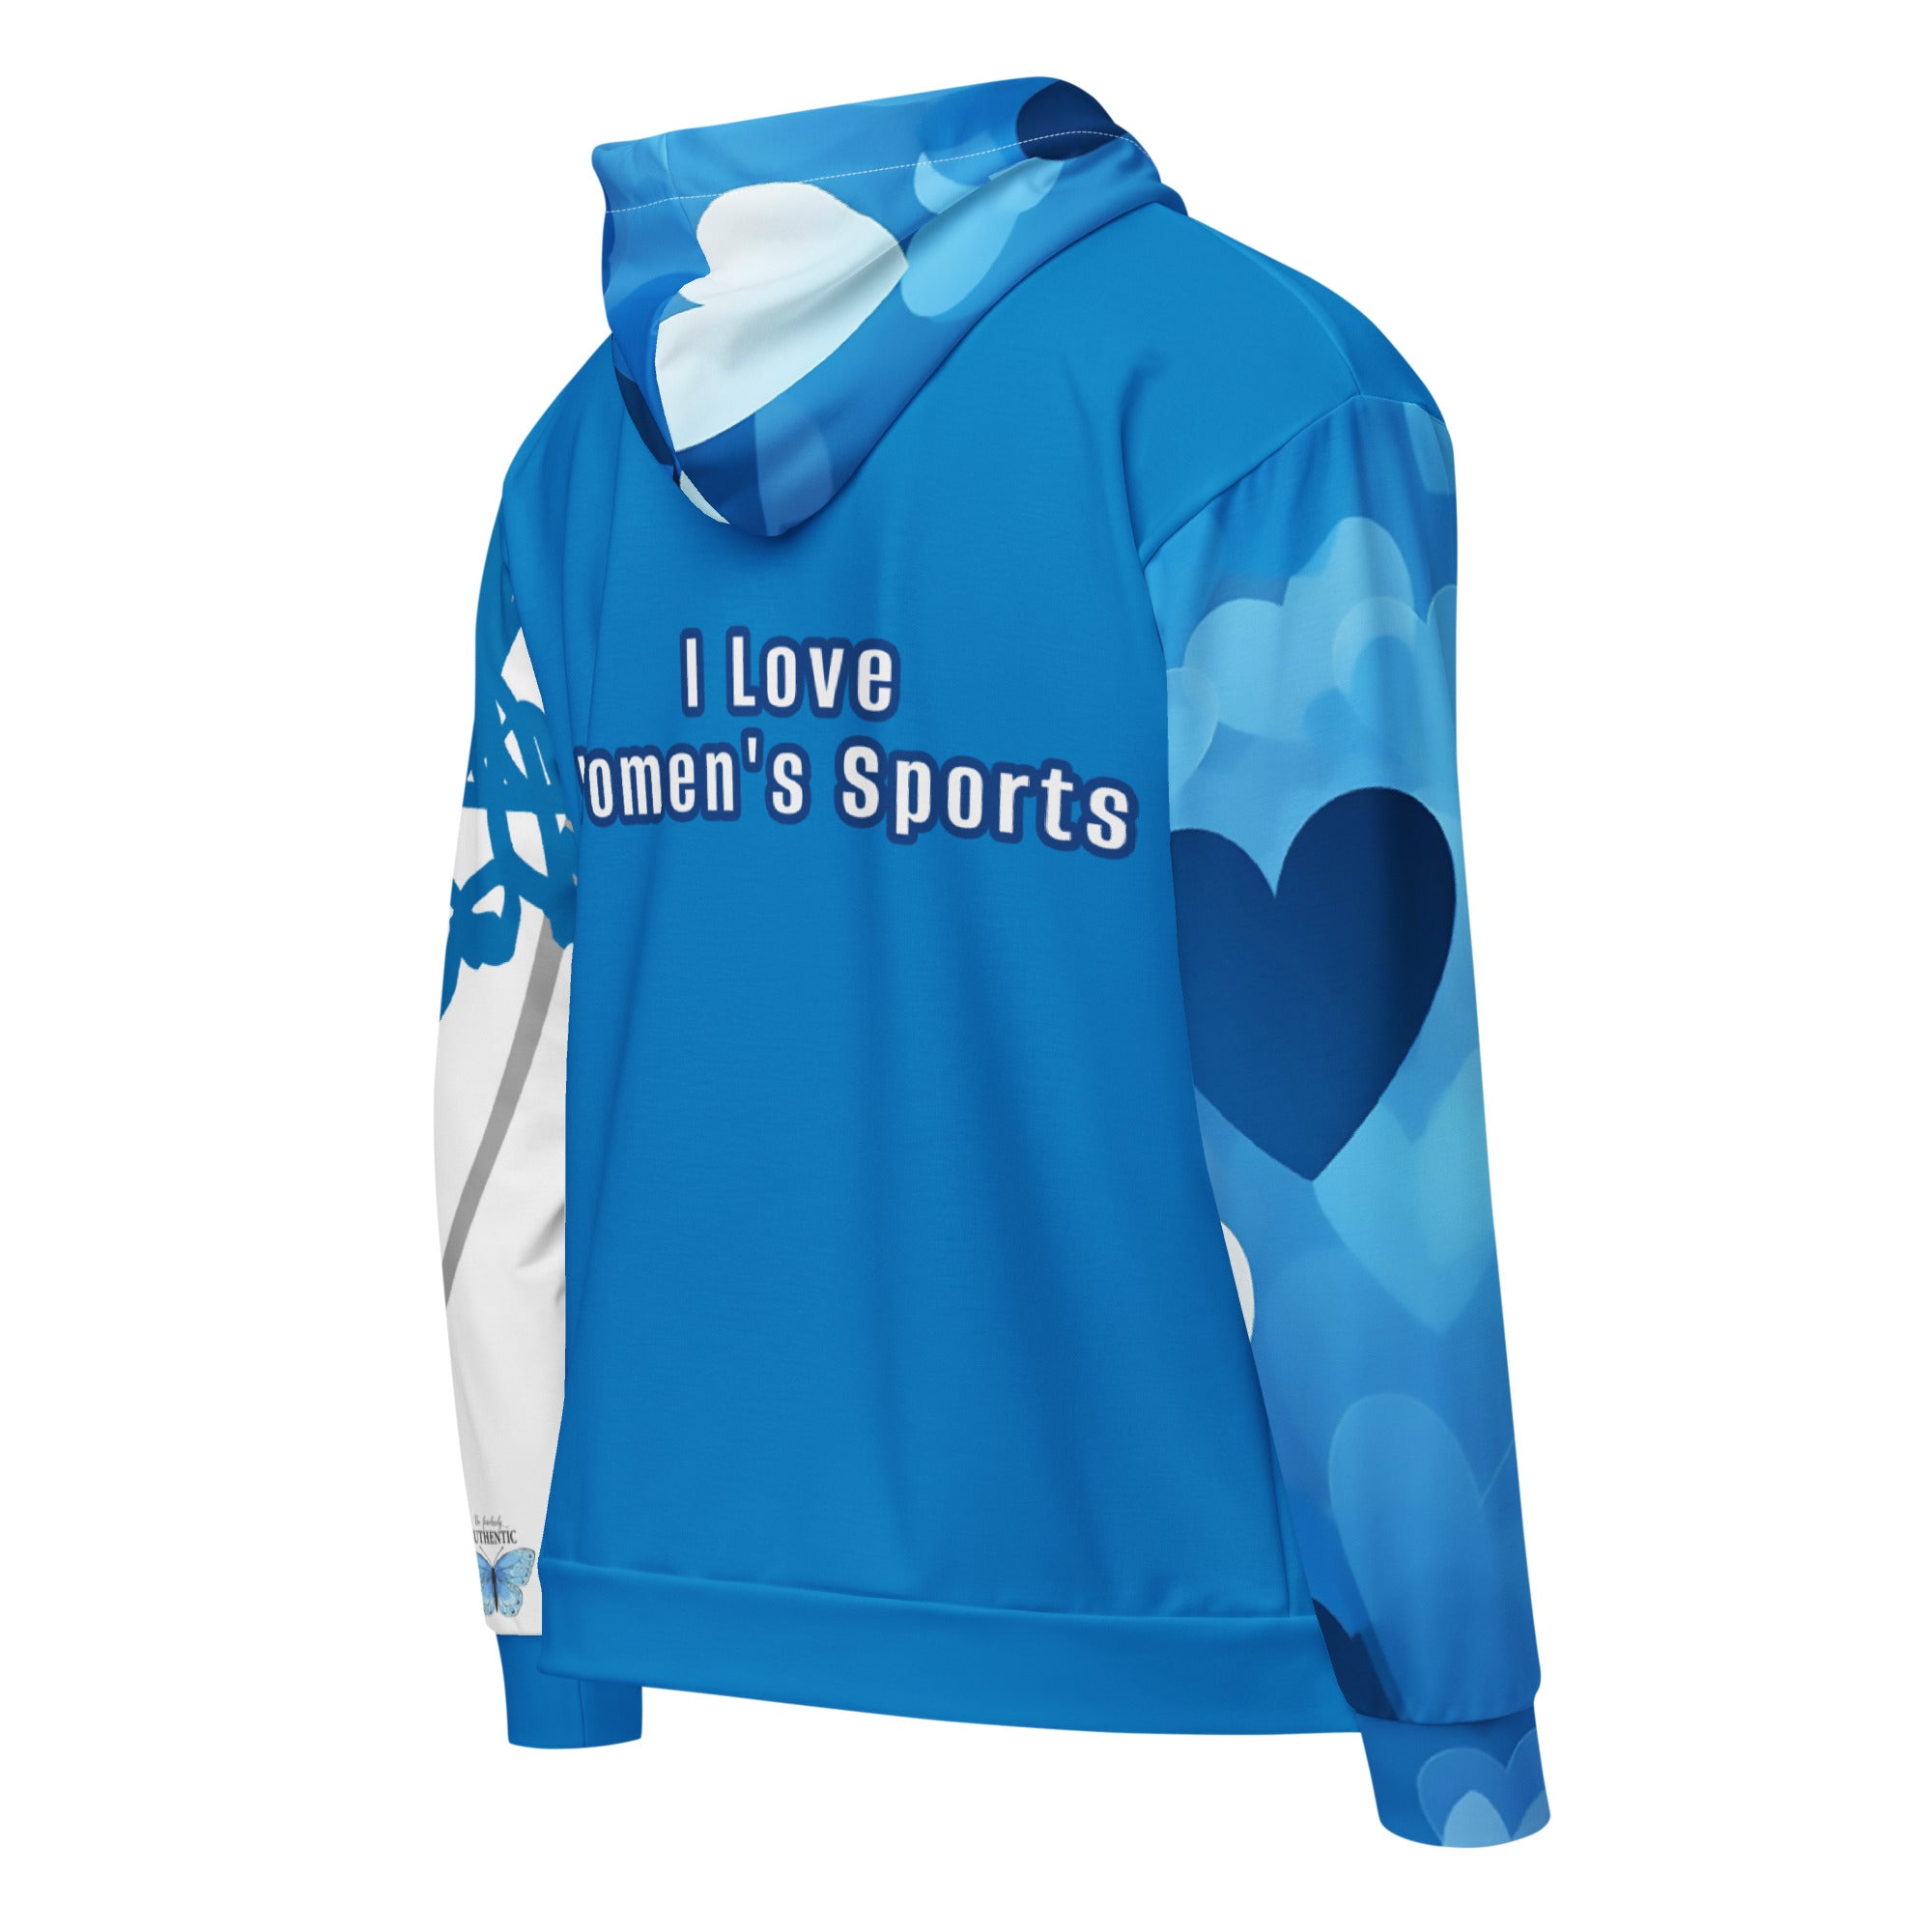 "I Love Women's Sports" Navy Blue Zip Hoodie Introducing the I Love Women's Sports Navy Blue zip hoodie, a must-have for every woman who loves sports. Made from 95% recycled polyester, this hoodie is both stylish and sustainable. With a soft, cotton-like